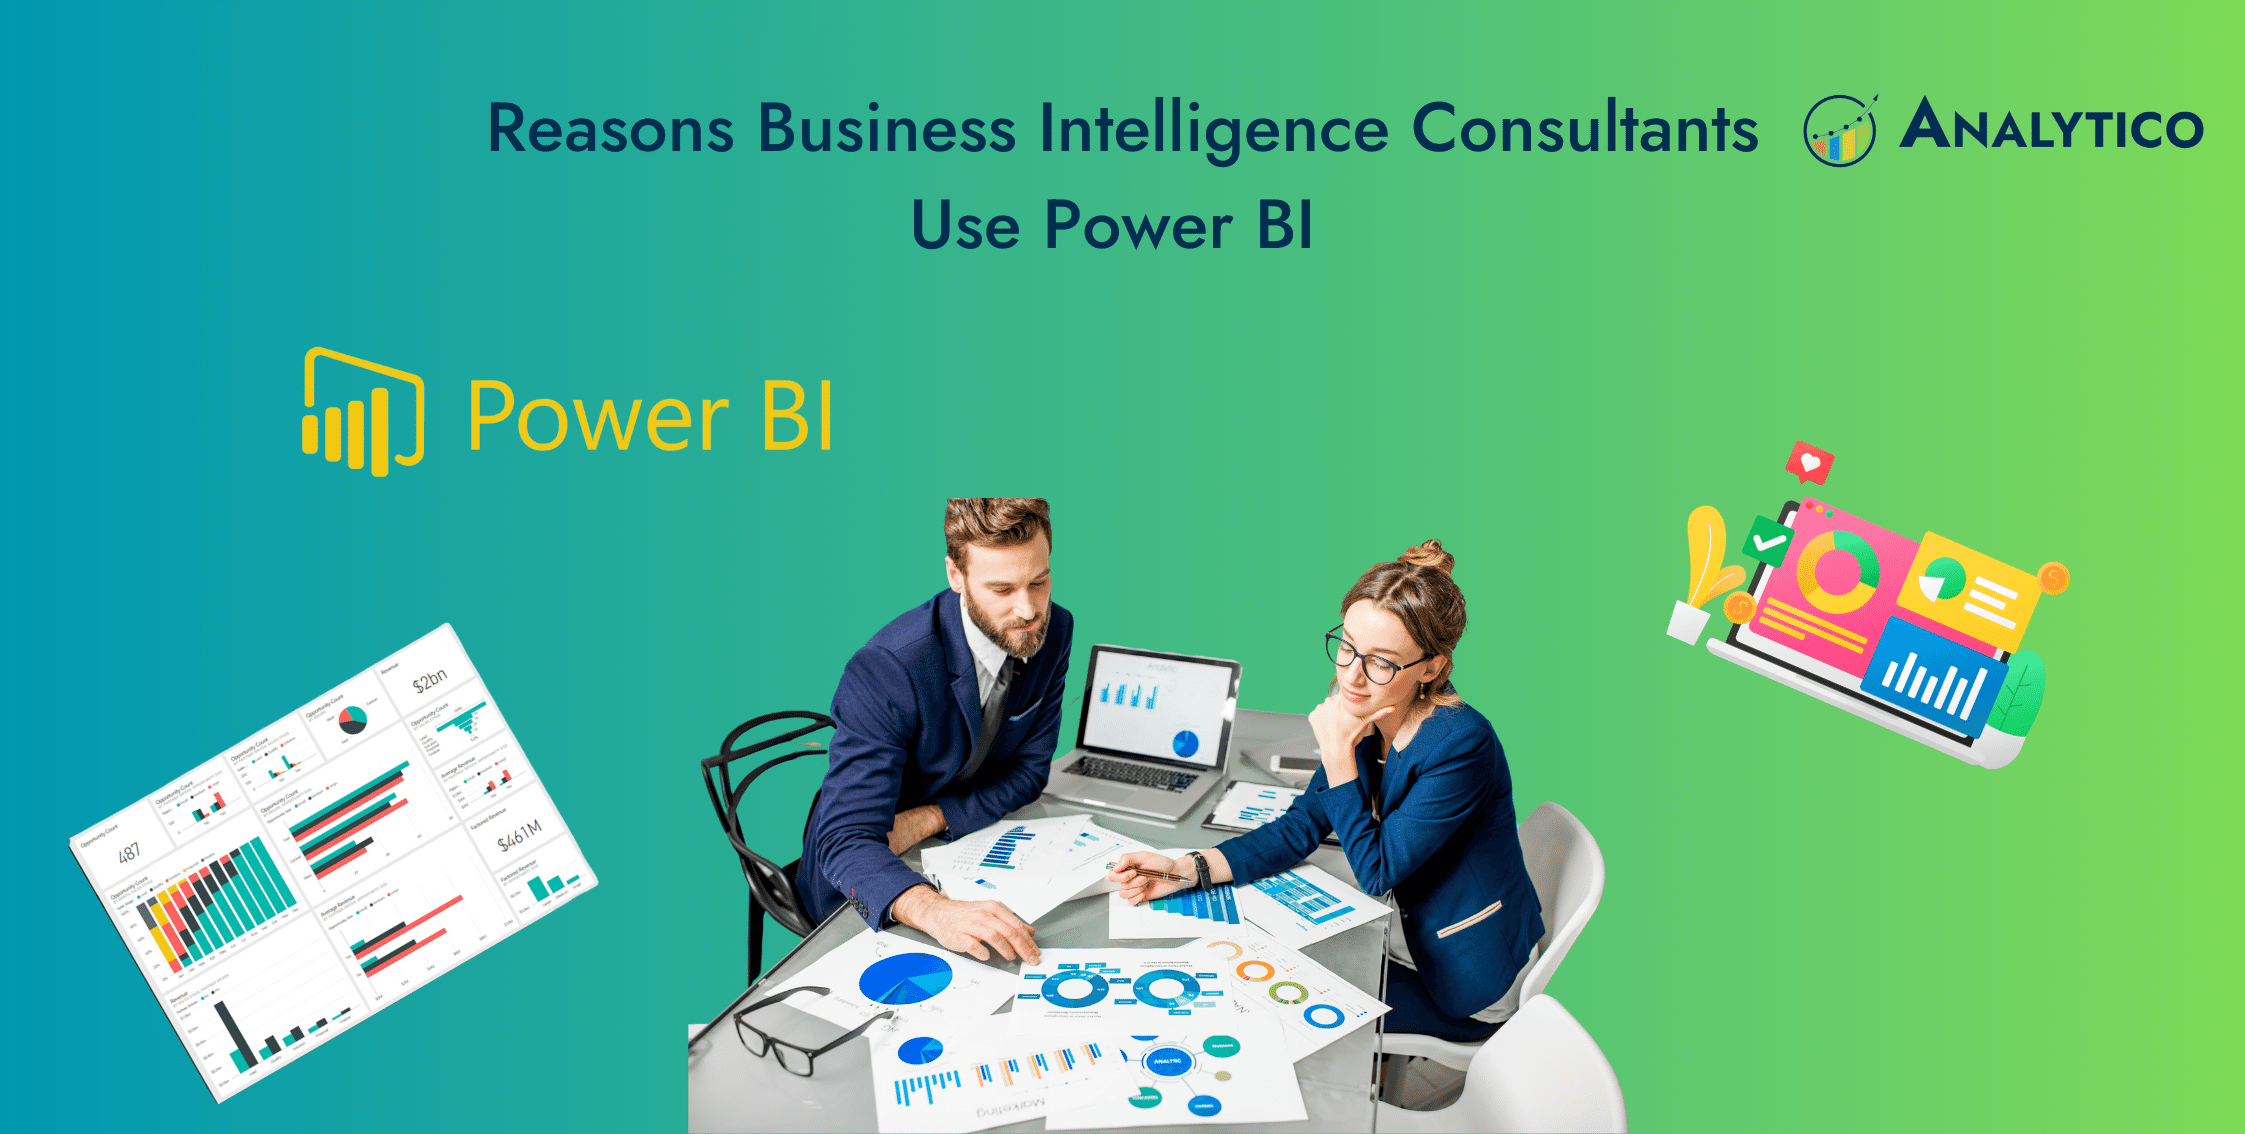 10 Reasons Business Intelligence Consultants Use Power BI